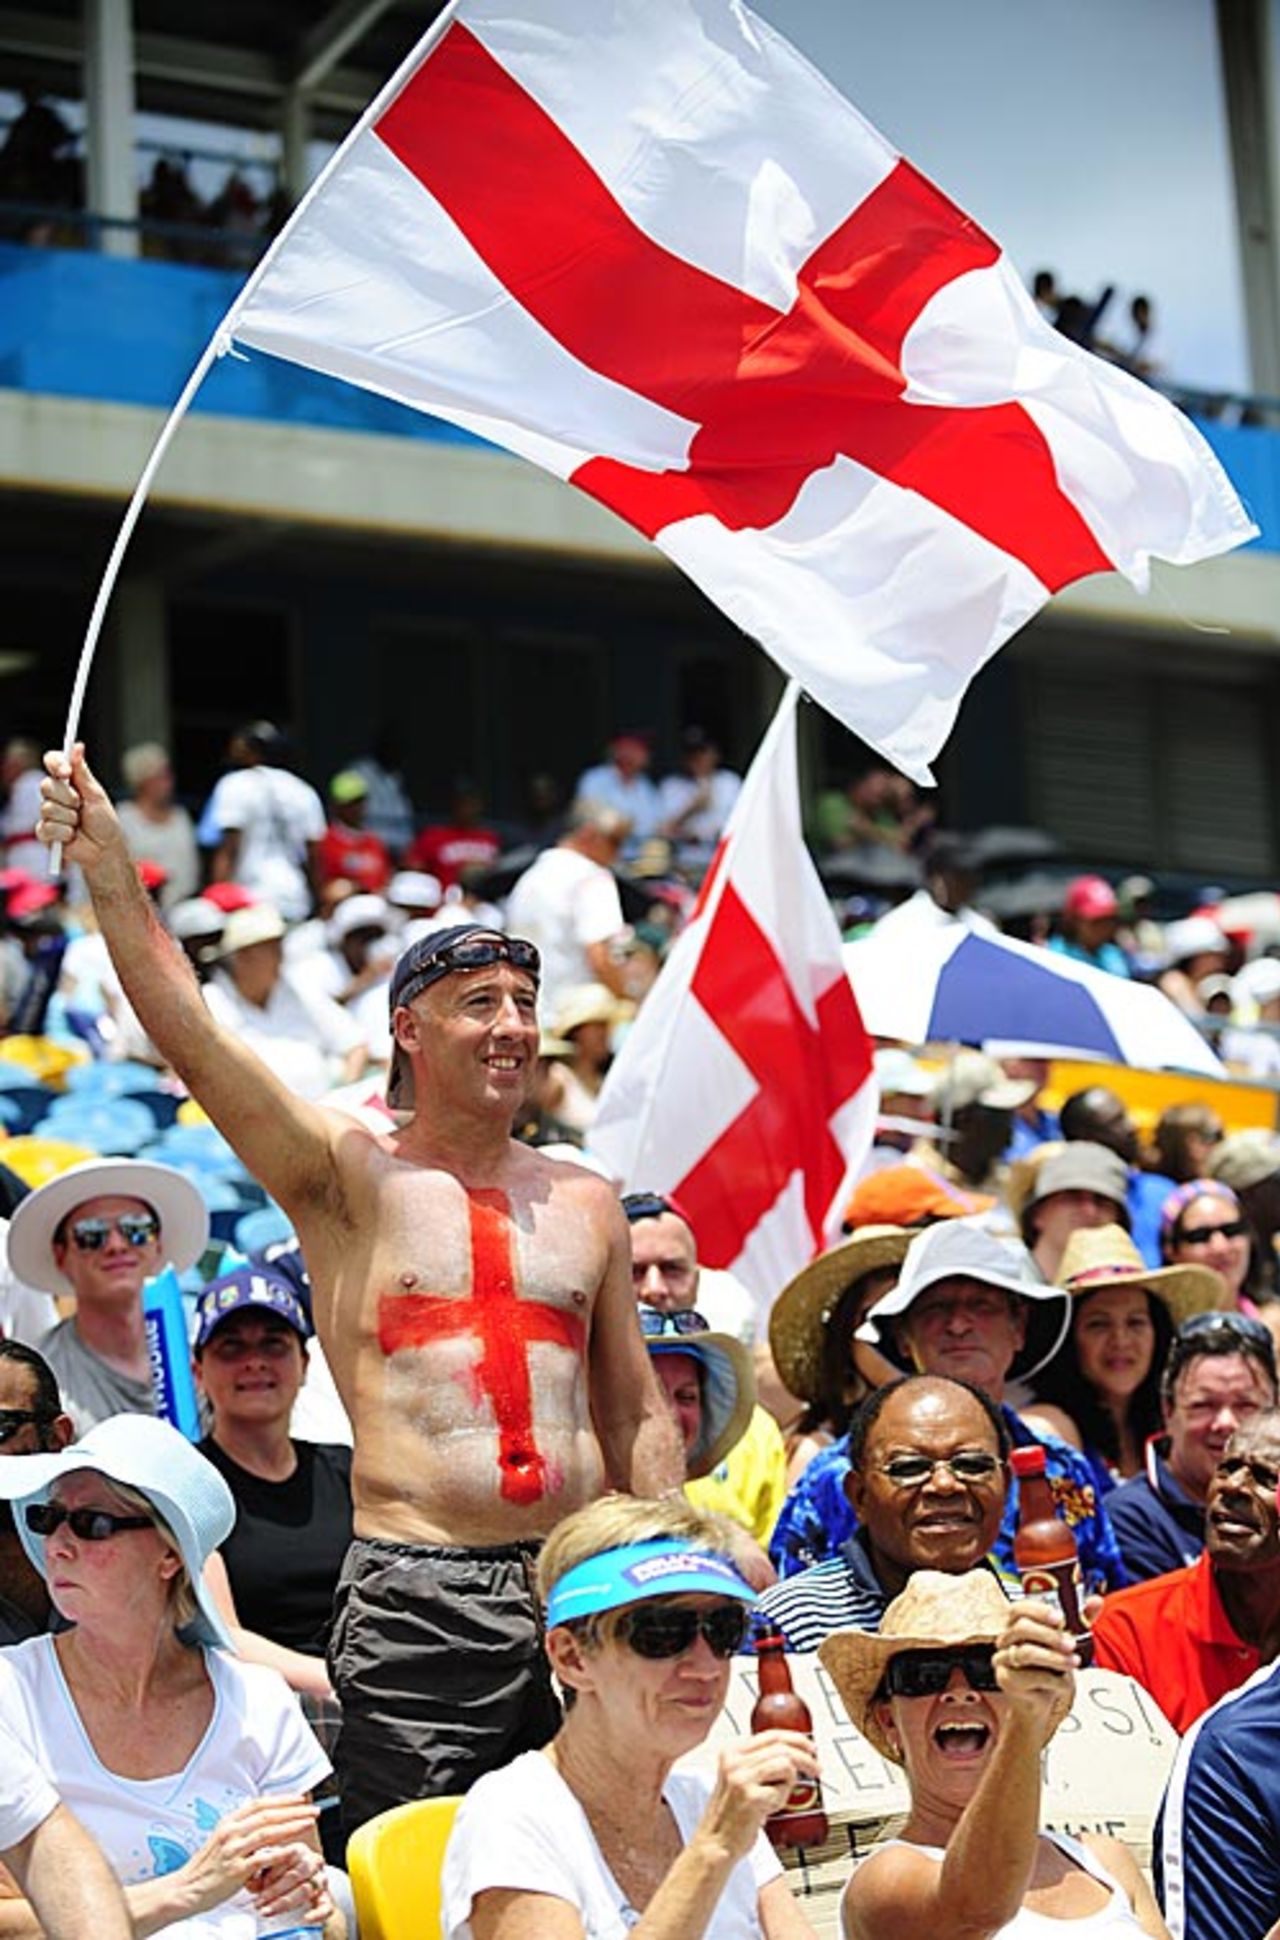 There was plenty of support for England in the stands, England v Australia, ICC World Twenty20 final, Barbados, May 16, 2010